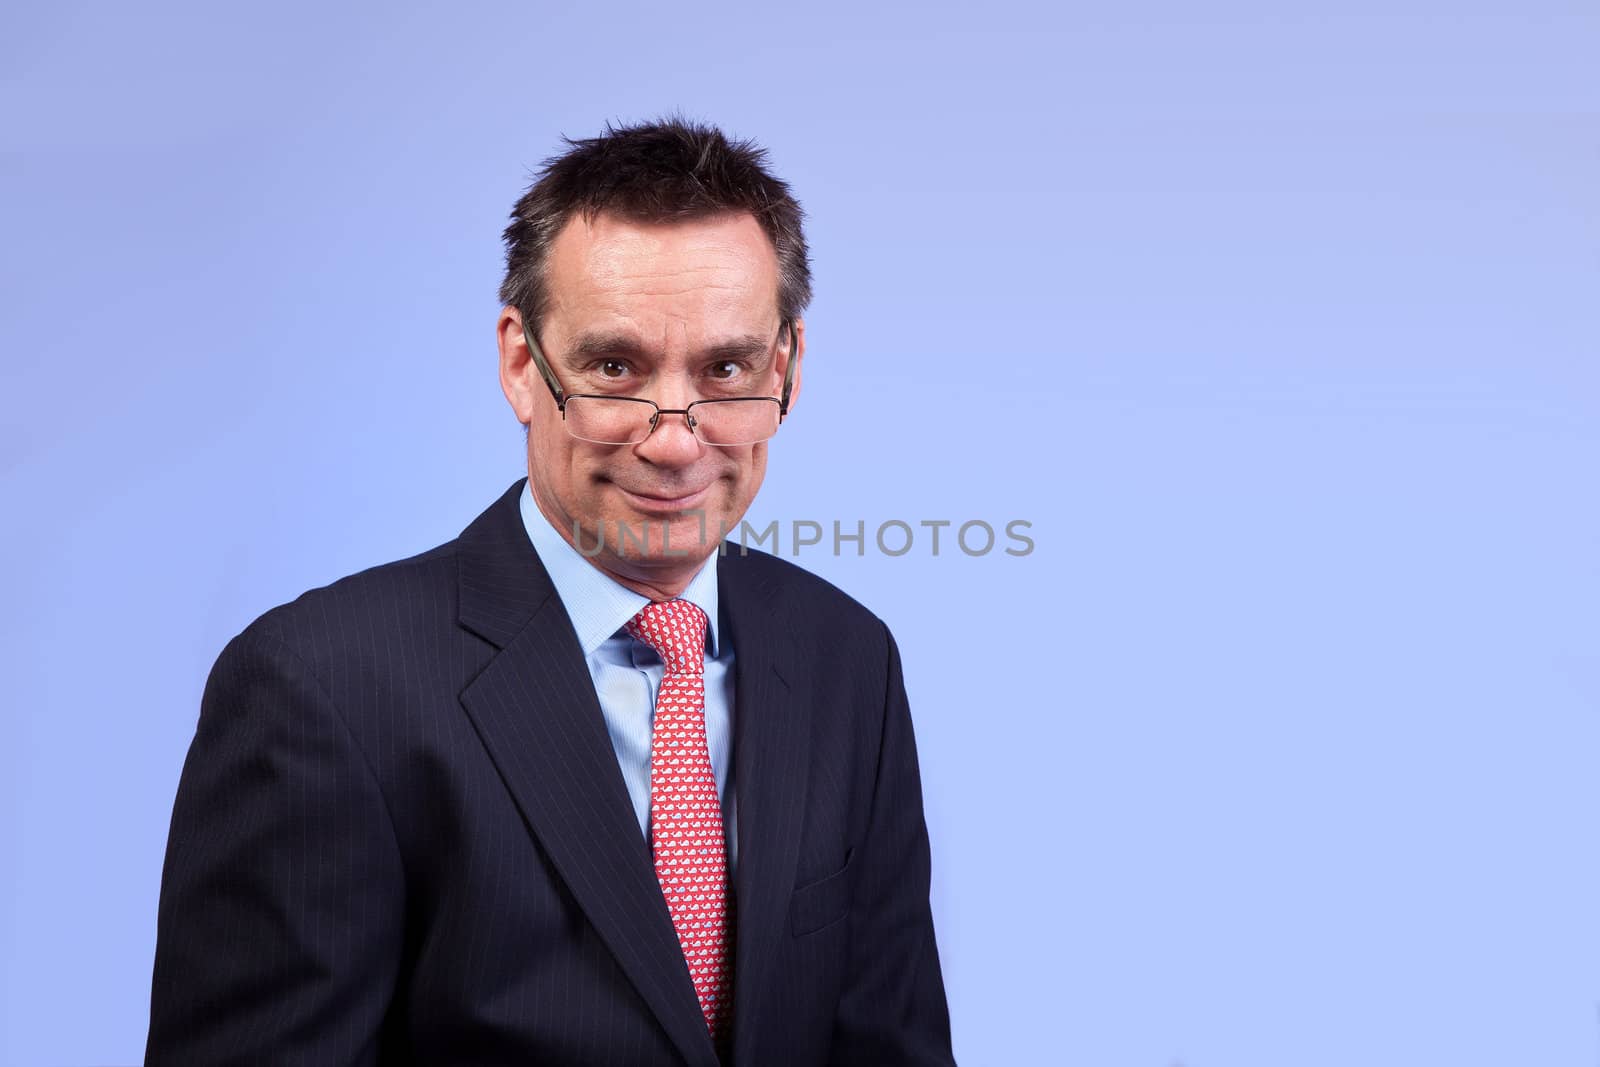 Smiling Business Man in Suit Looking Over Glasses by scheriton